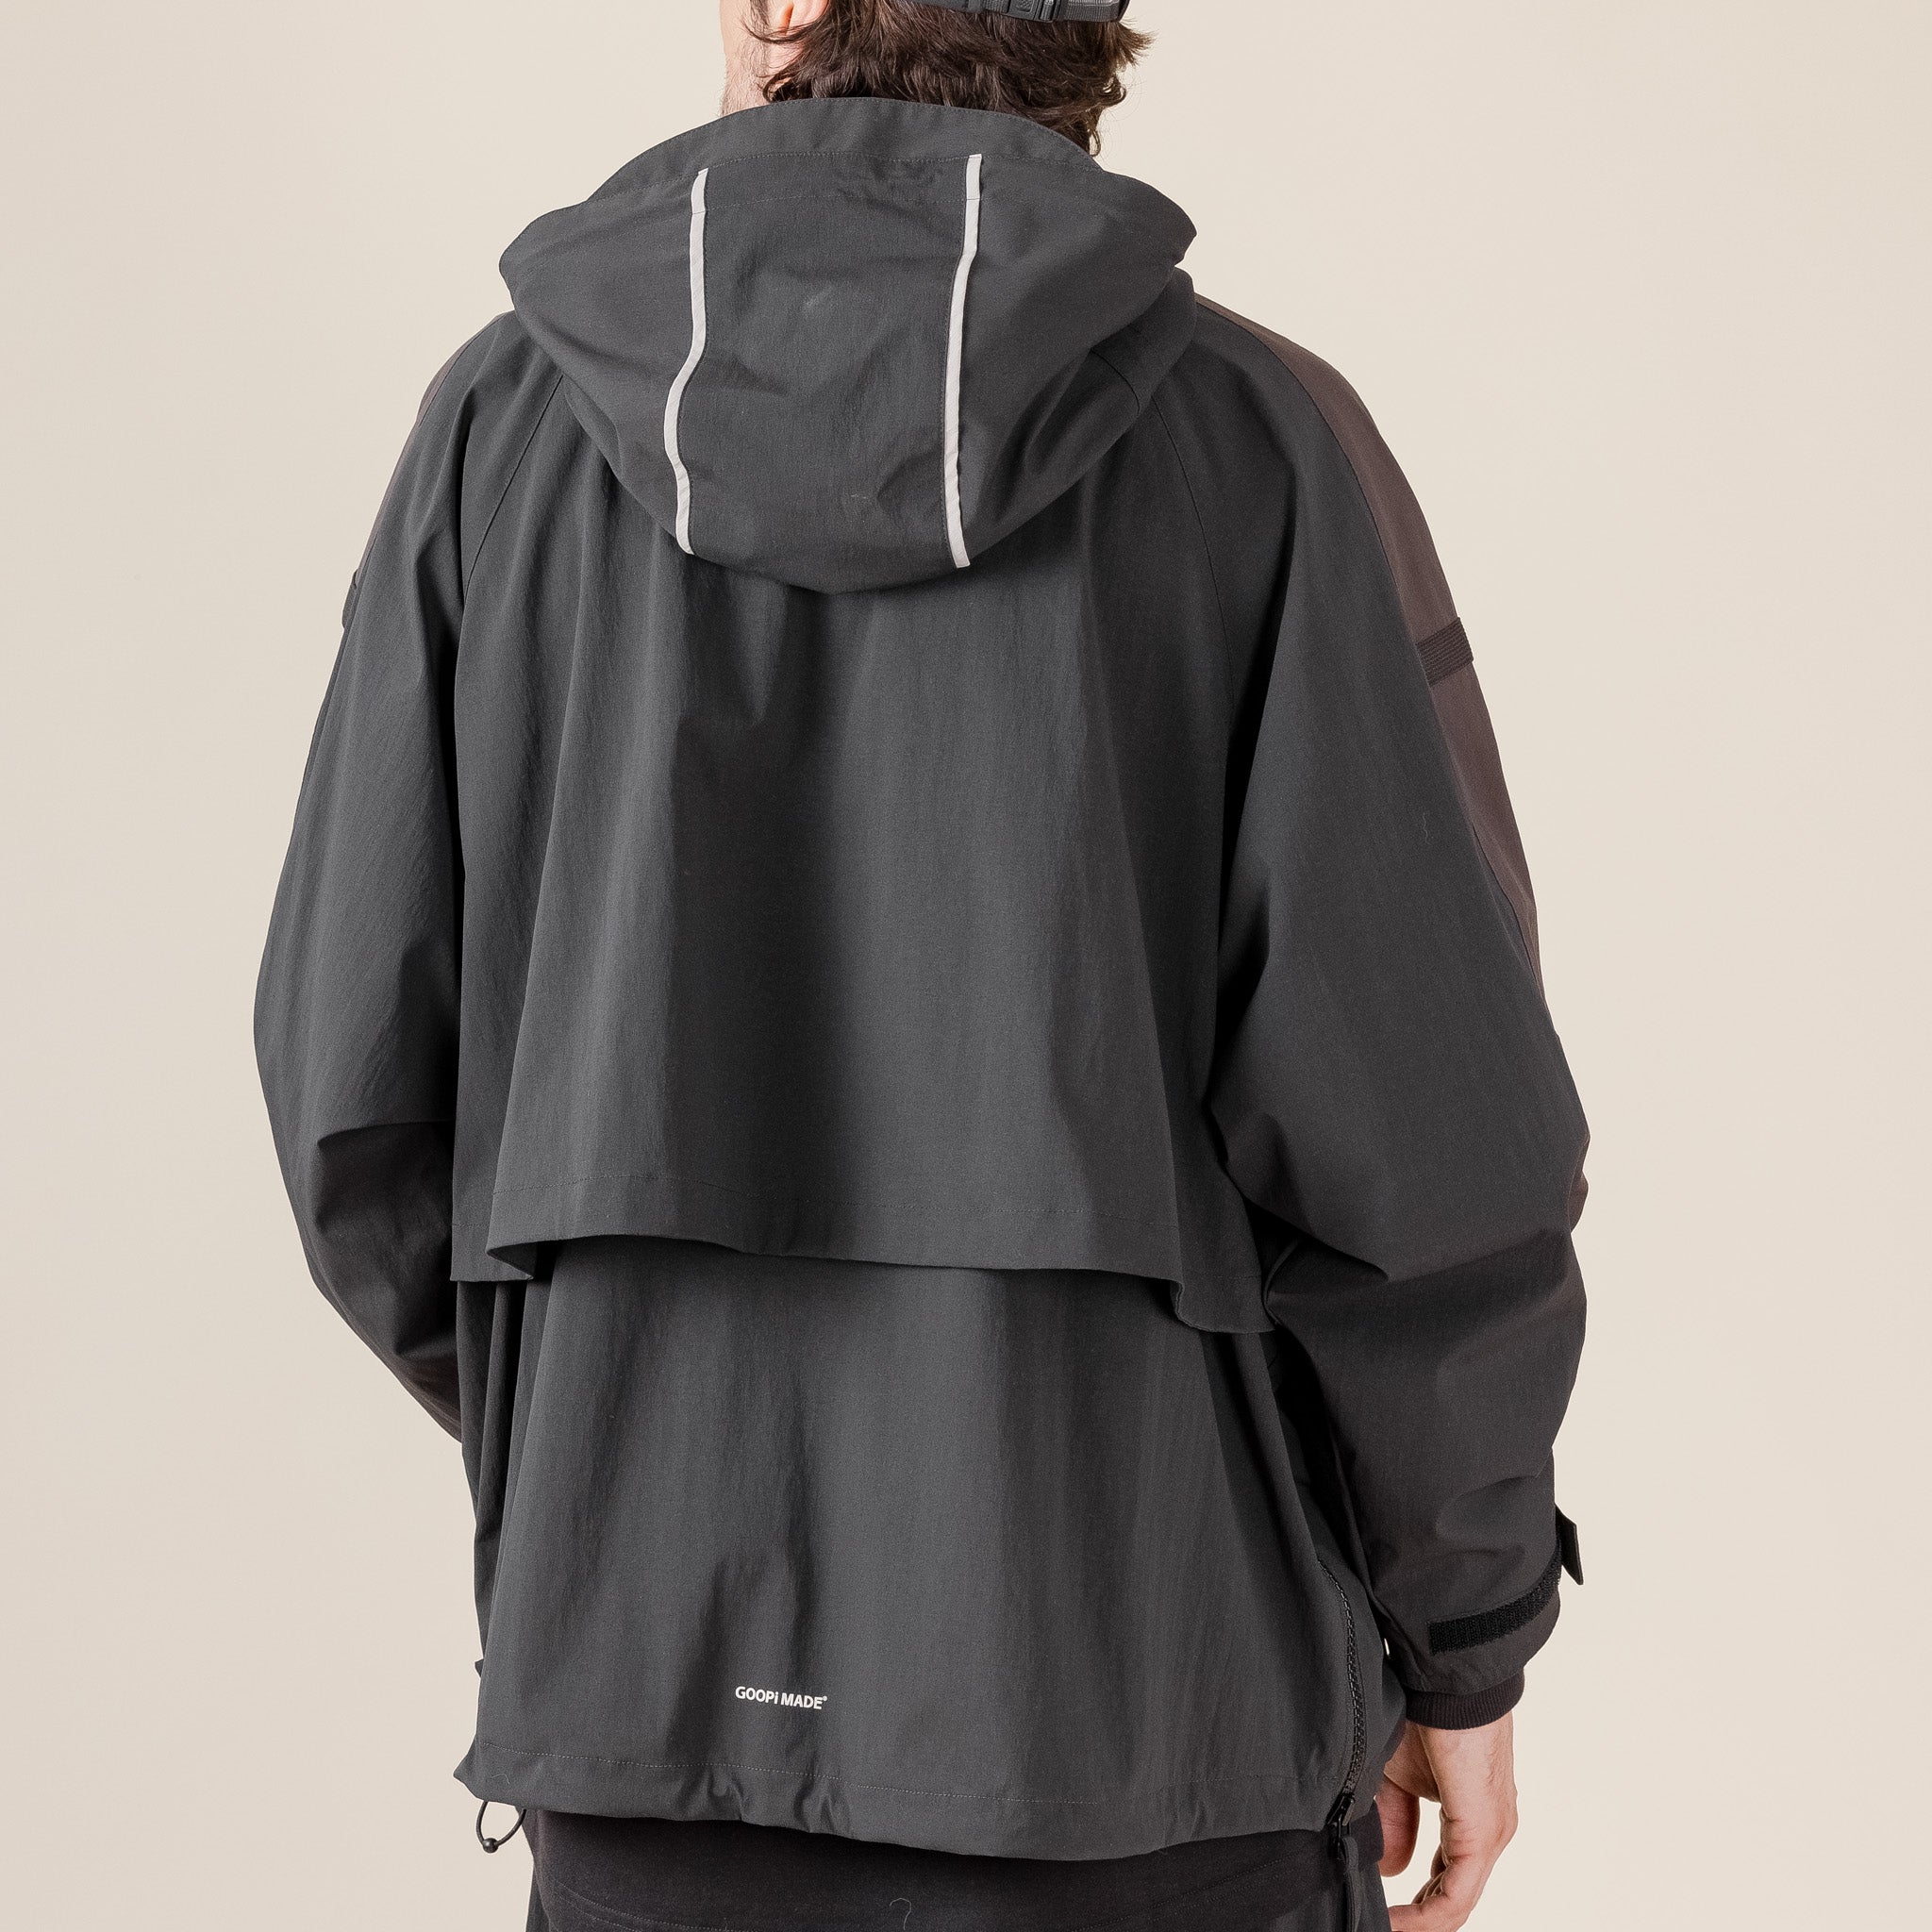 GOOPiMADE X TTOO - “Gof-A3”  Tech-Meander Pullover Jacket - Black "goopimade this thing of ours" "goopimade TTOO collaboration" 